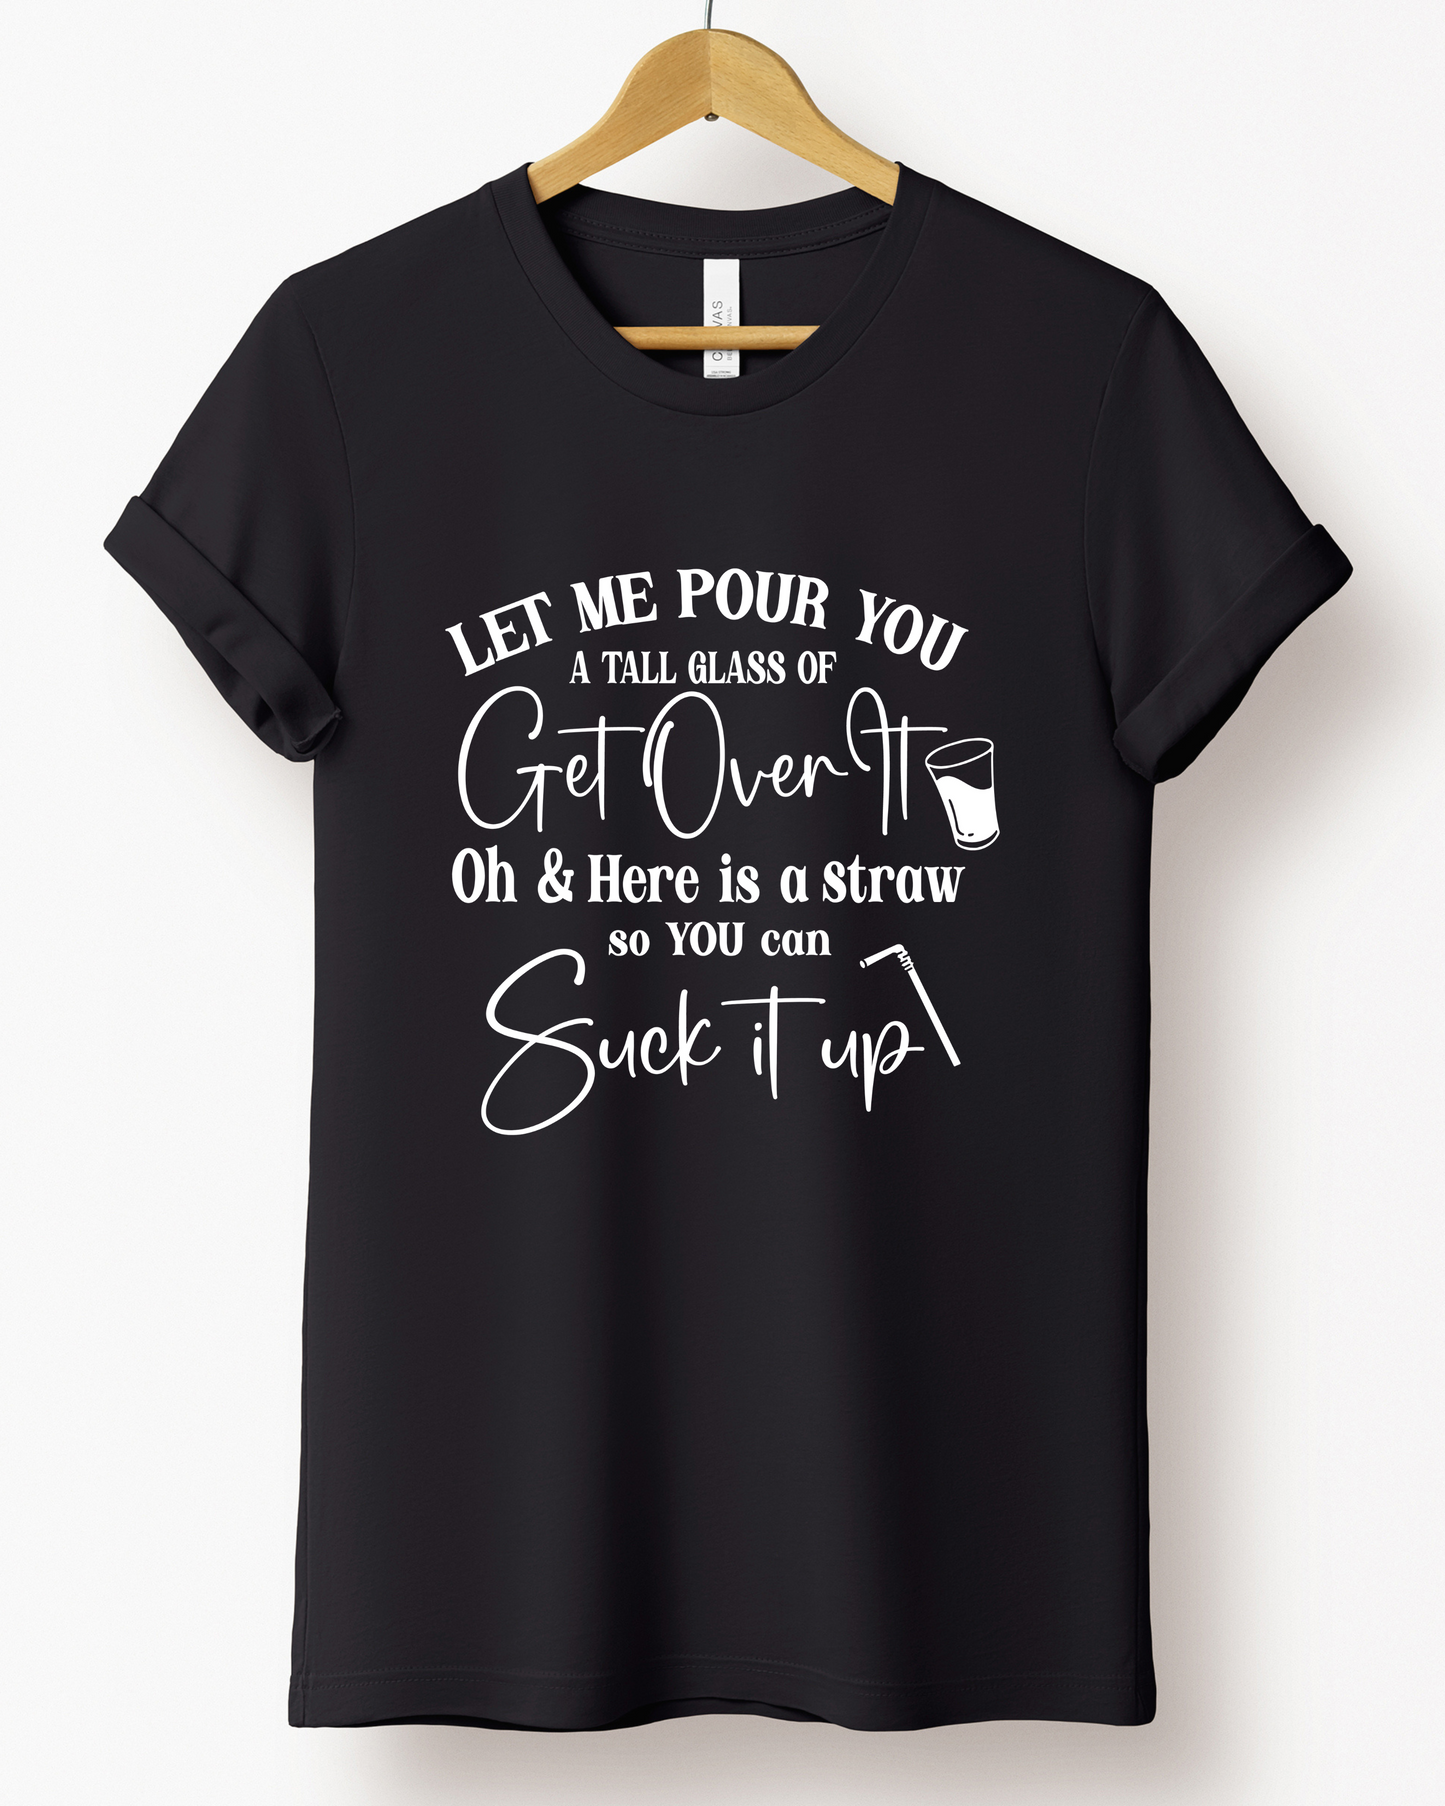 Let me pour you Graphic tee shirt